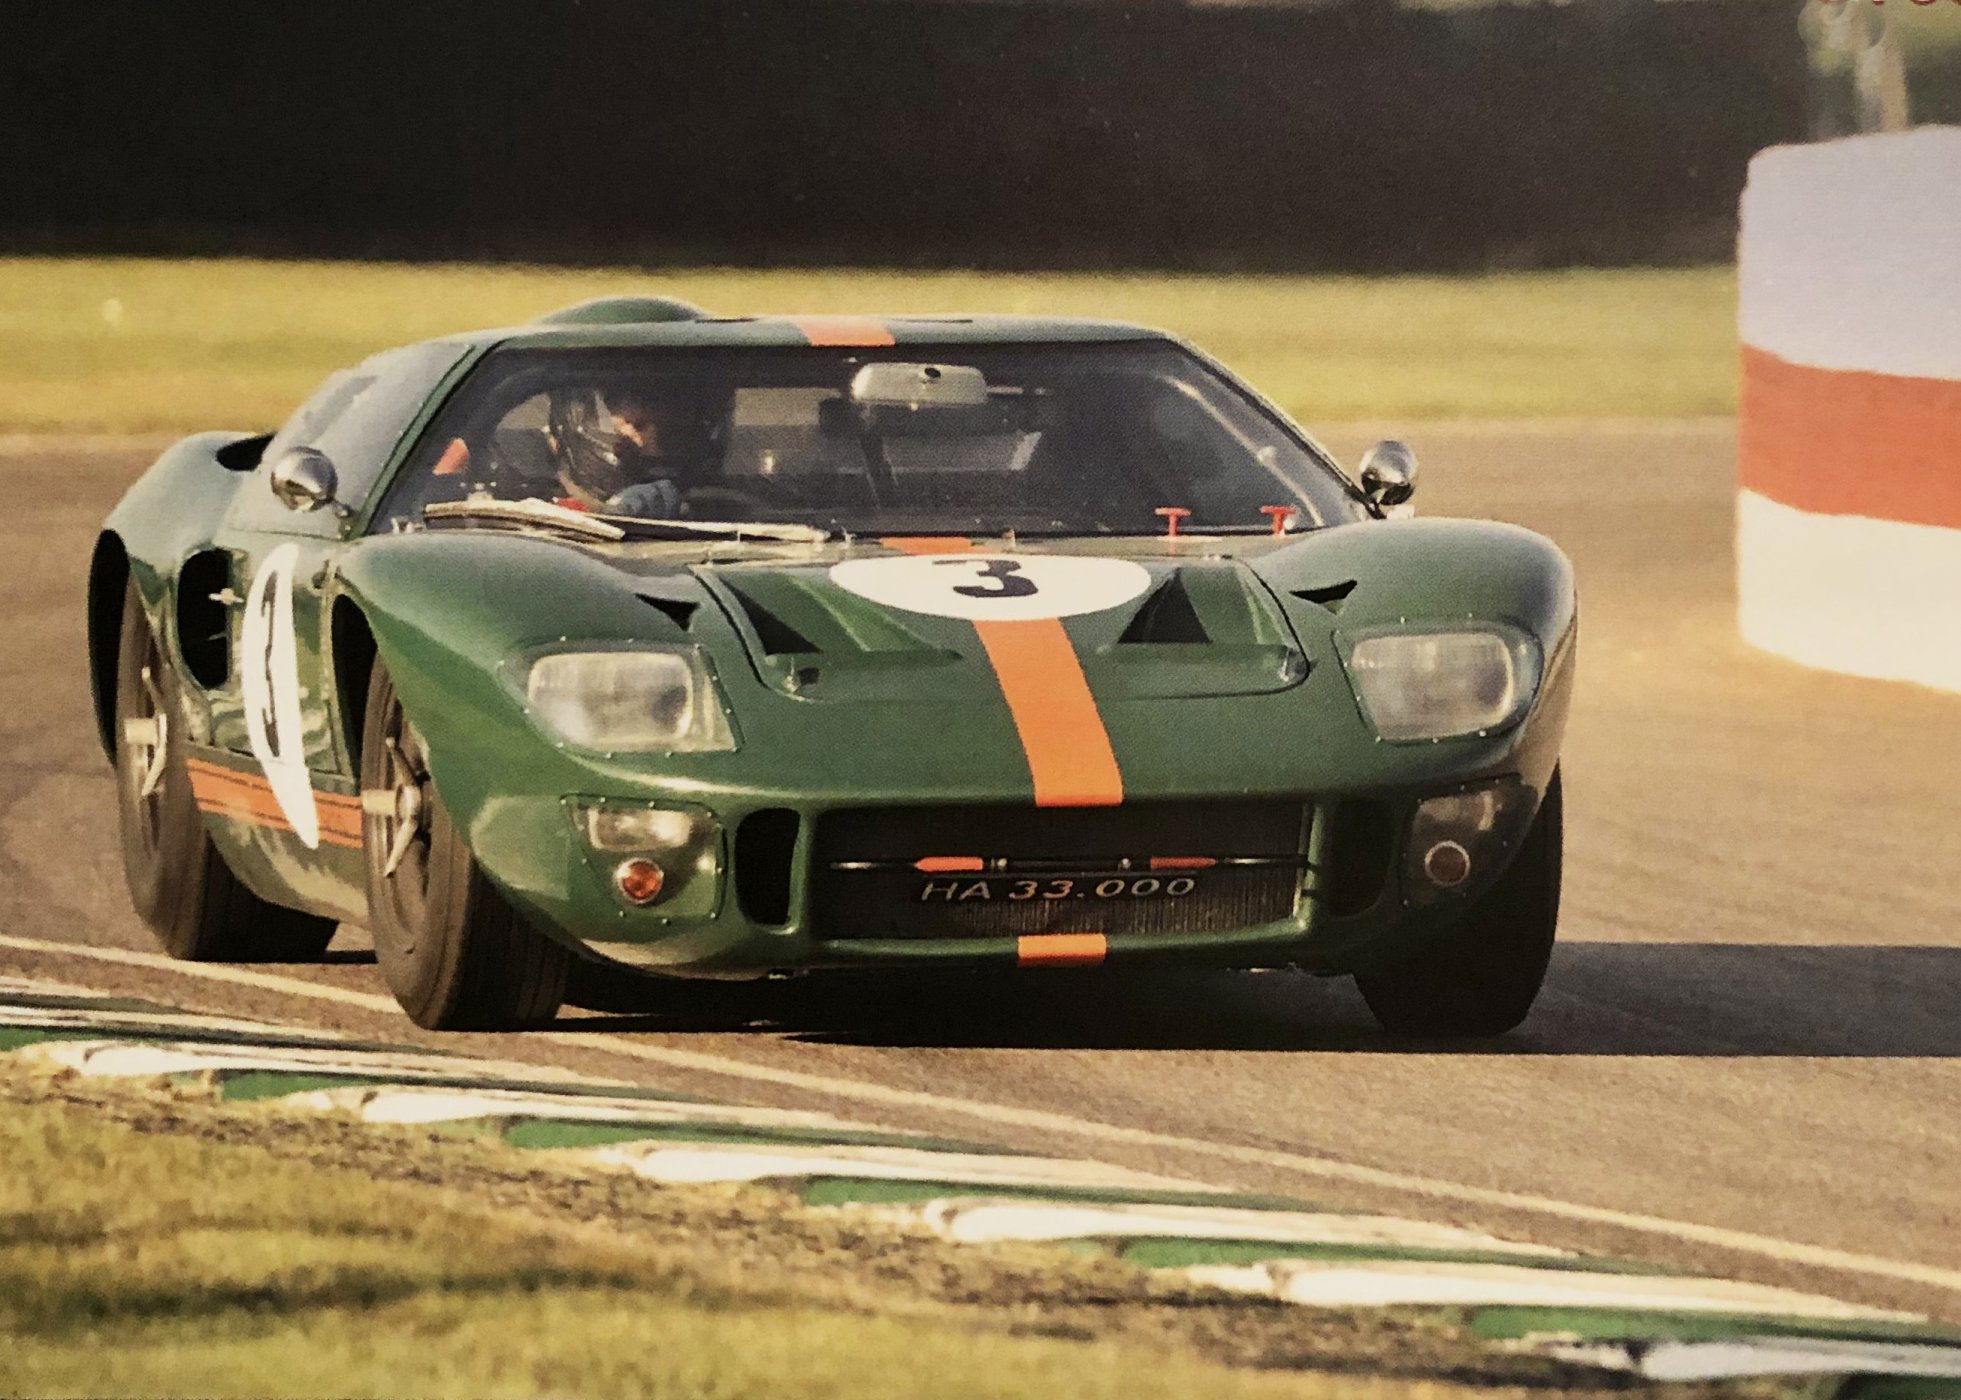 GT40P1000 at Goodwood chicane  Revival 2021.jpg